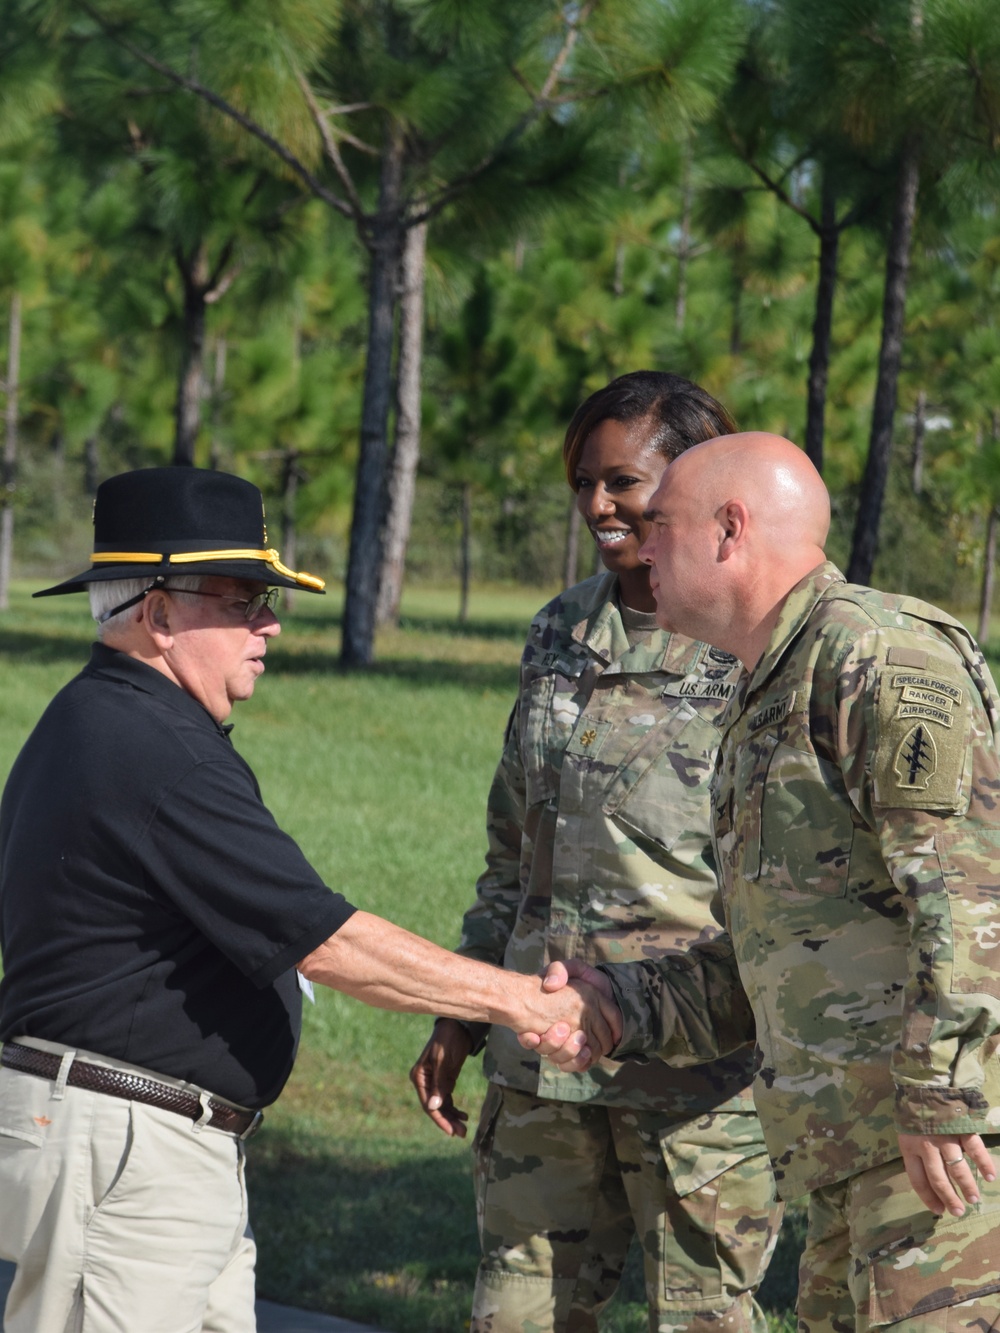 Vietnam Veterans visit 7th SFG (A) to see an increase in Soldier readiness in the Army